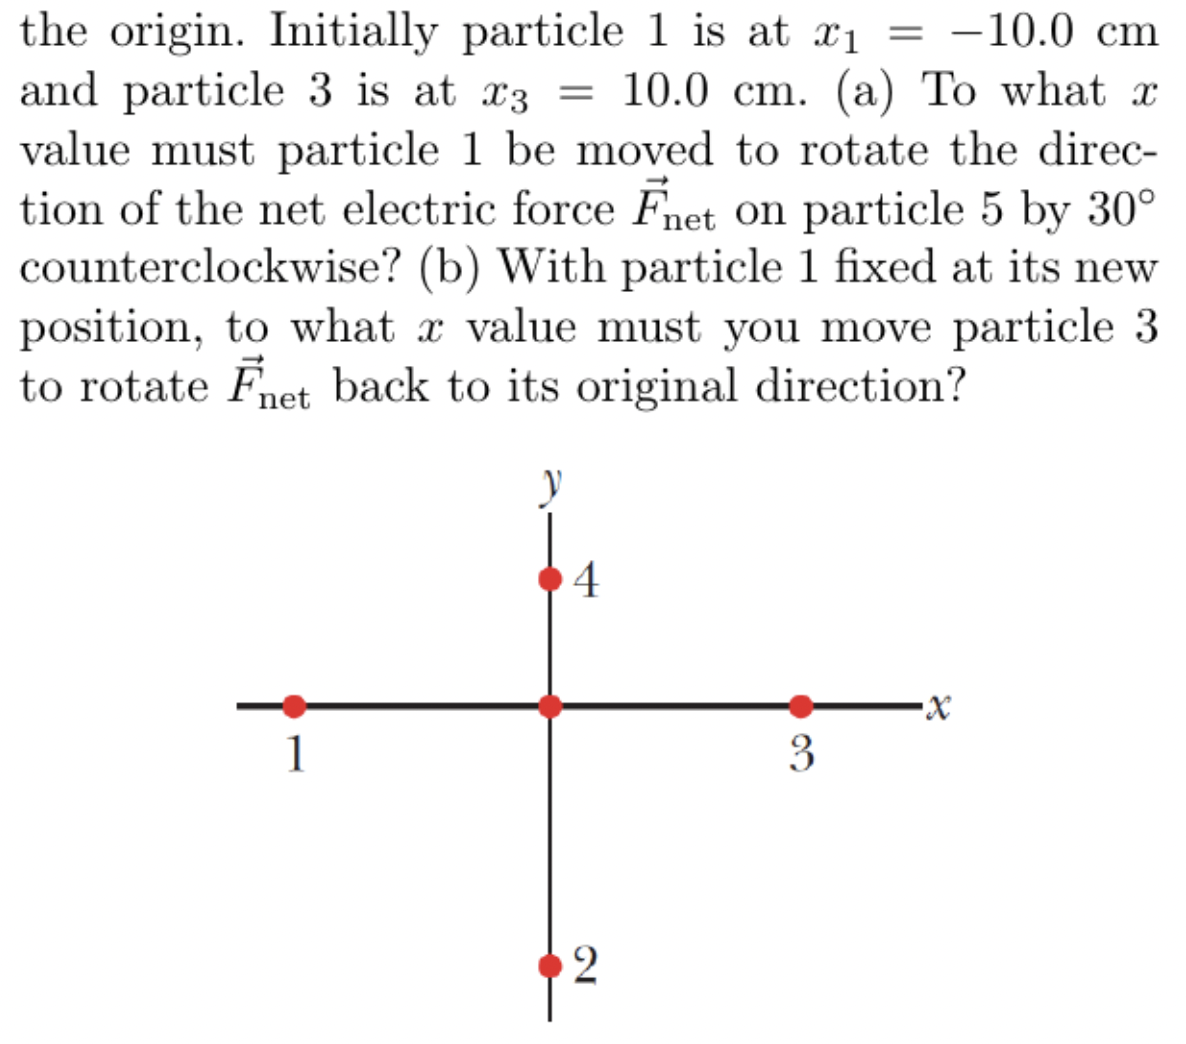 the origin. Initially particle 1 is at x₁ = -10.0 cm
and particle 3 is at x3 = 10.0 cm. (a) To what x
value must particle 1 be moved to rotate the direc-
tion of the net electric force Fnet on particle 5 by 30°
counterclockwise? (b) With particle 1 fixed at its new
position, to what a value must you move particle 3
to rotate Fnet back to its original direction?
1
V
4
2
3